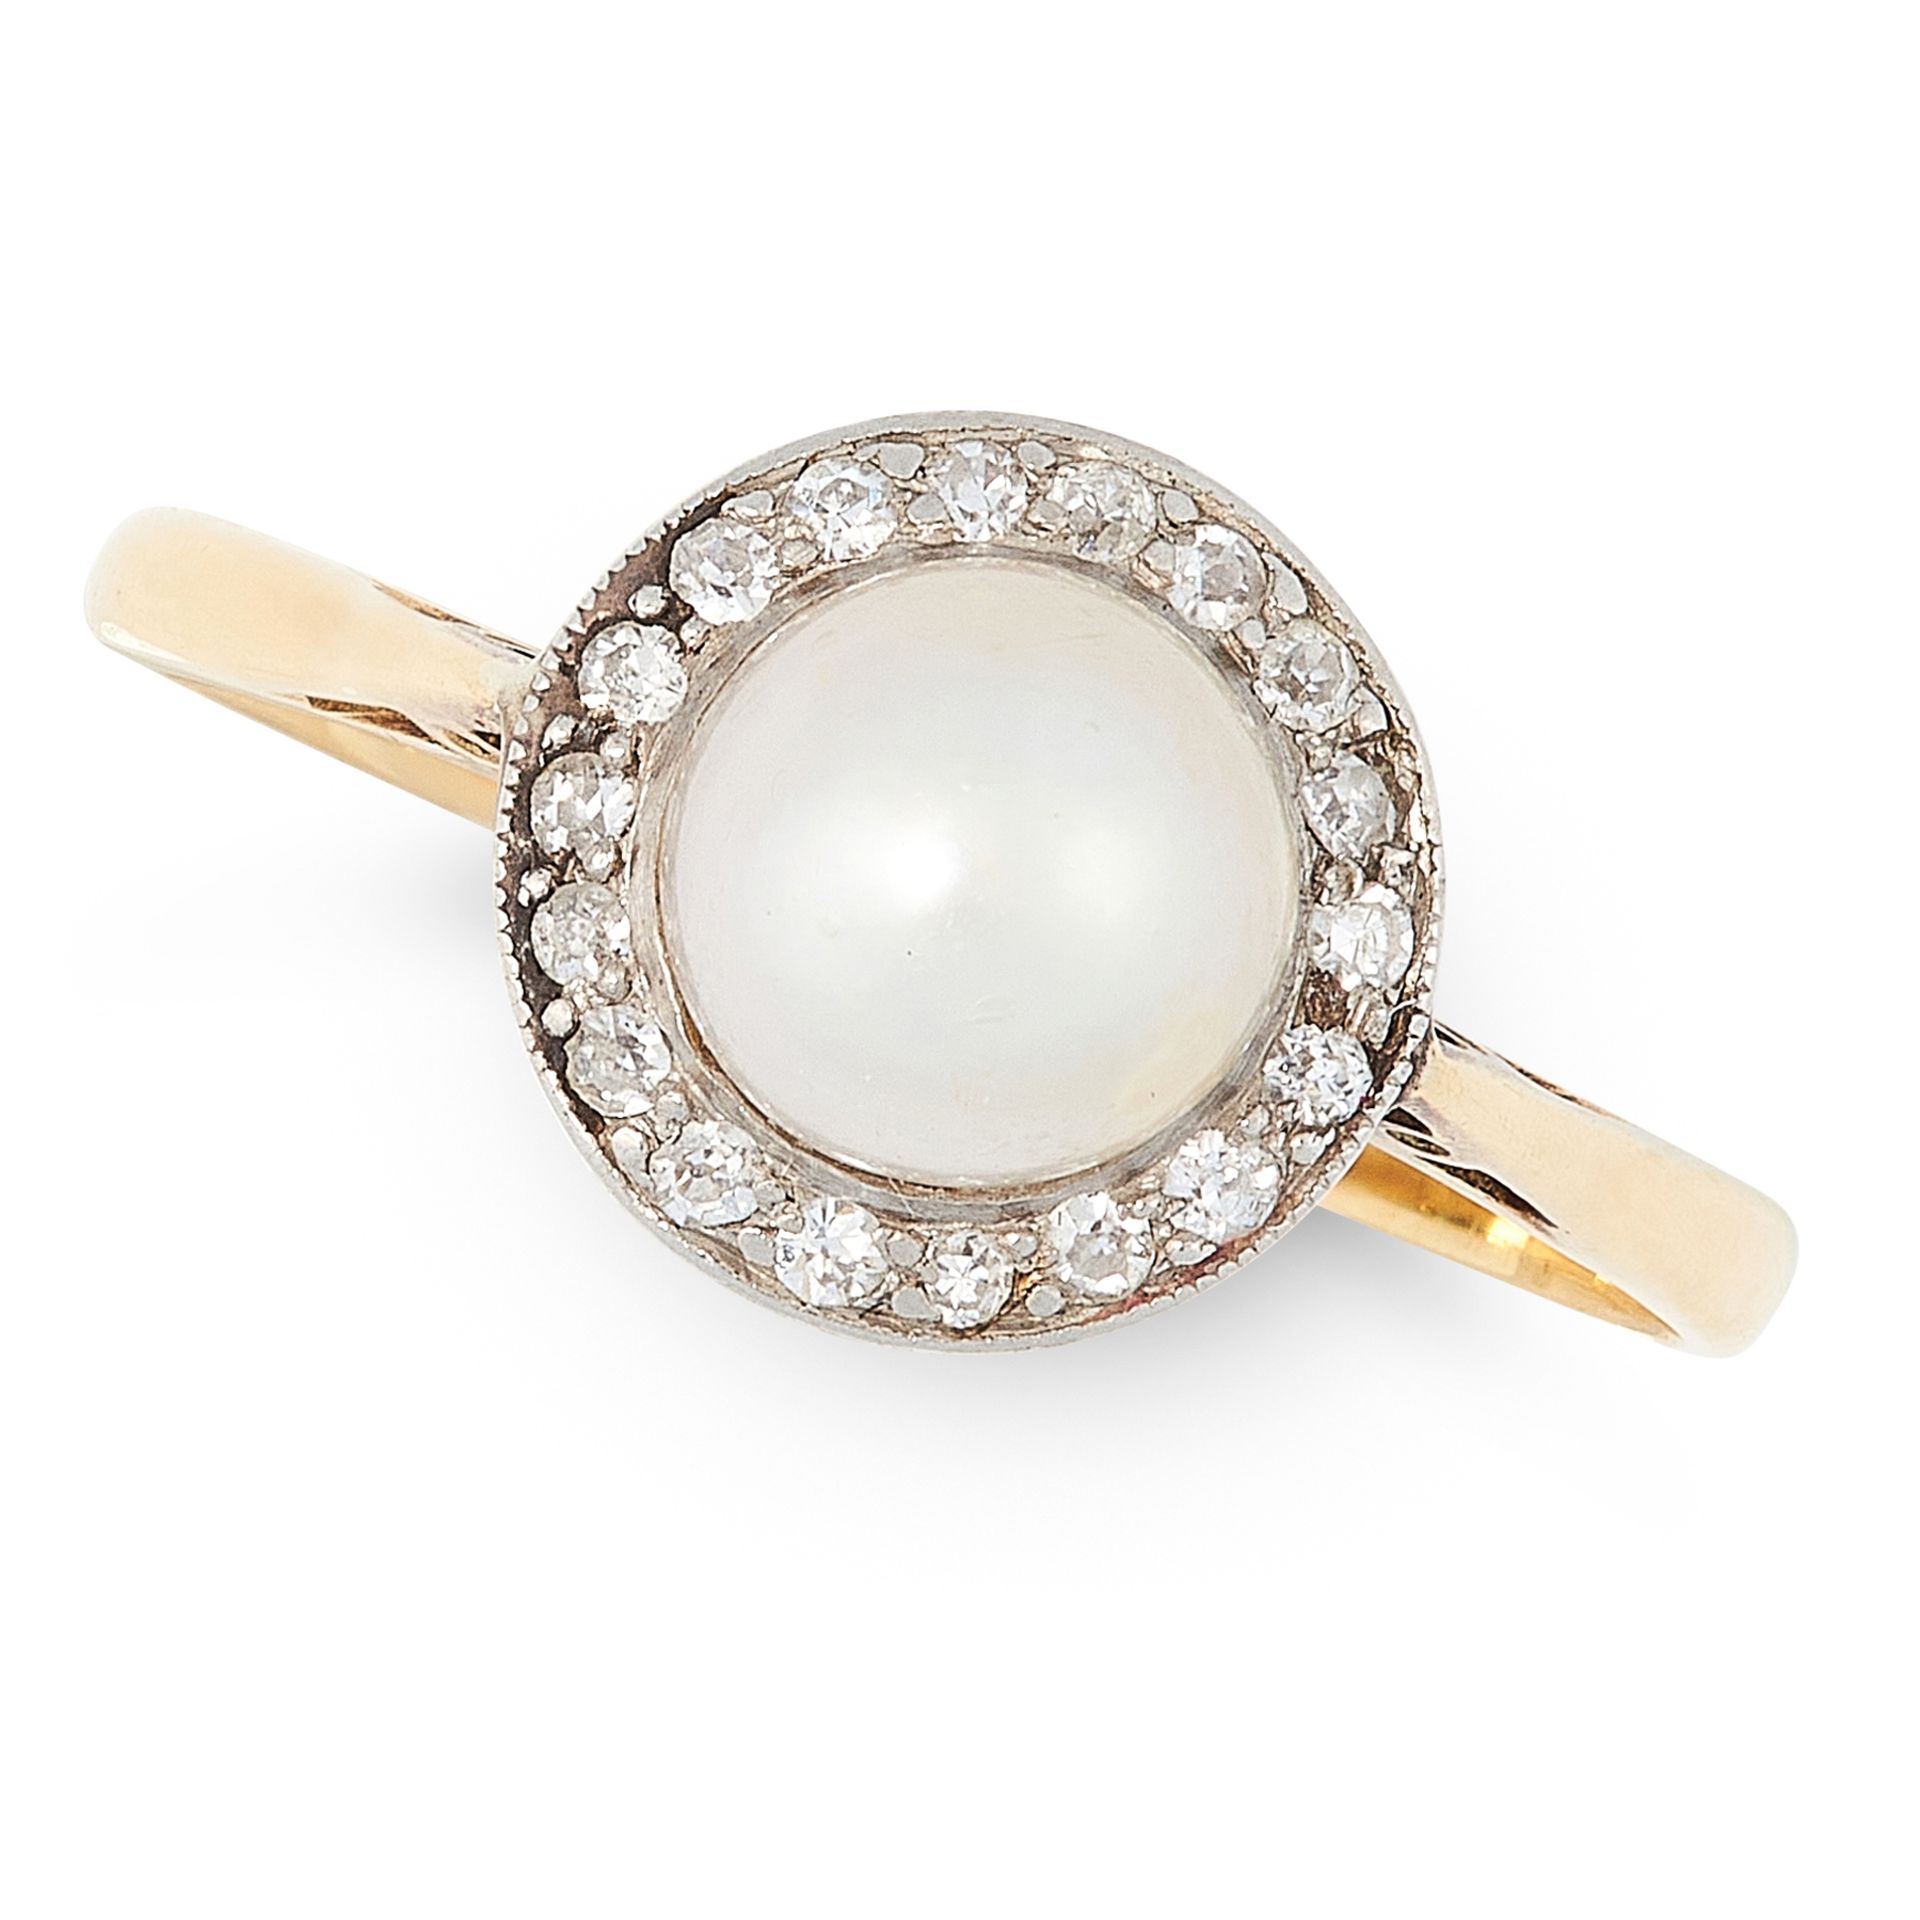 A PEARL AND DIAMOND RING in 18ct yellow gold and platinum, set with a pearl of 6.7mm within a border